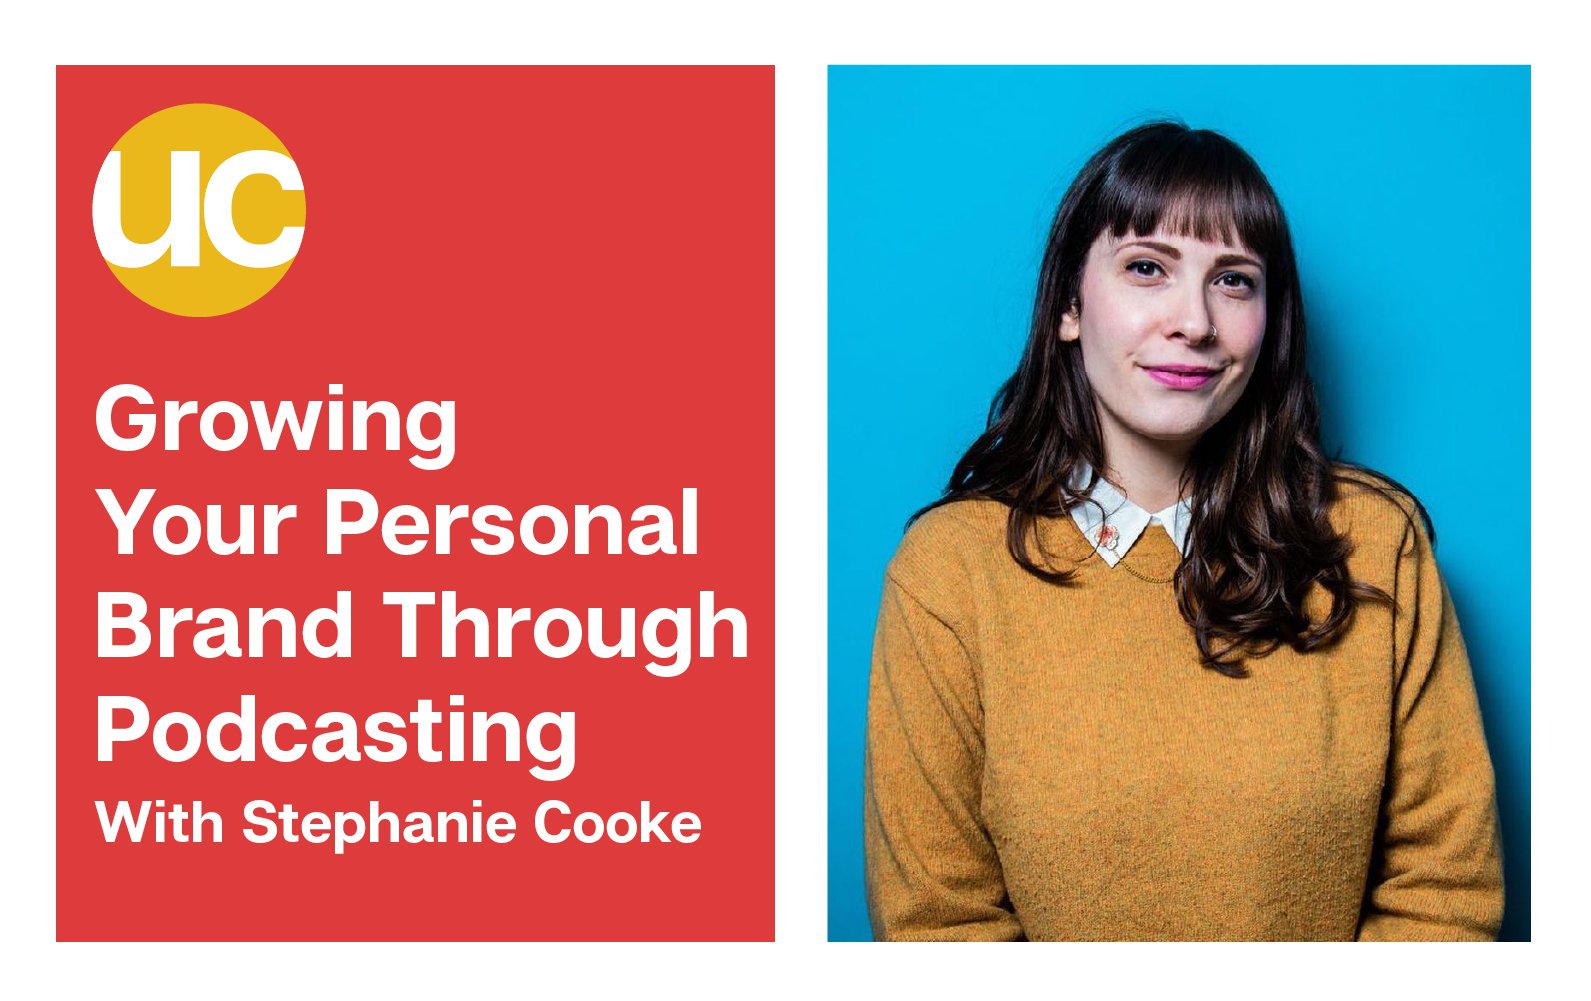 Episode 9: Growing Your Personal Brand Through Podcasting With Stephanie Cooke